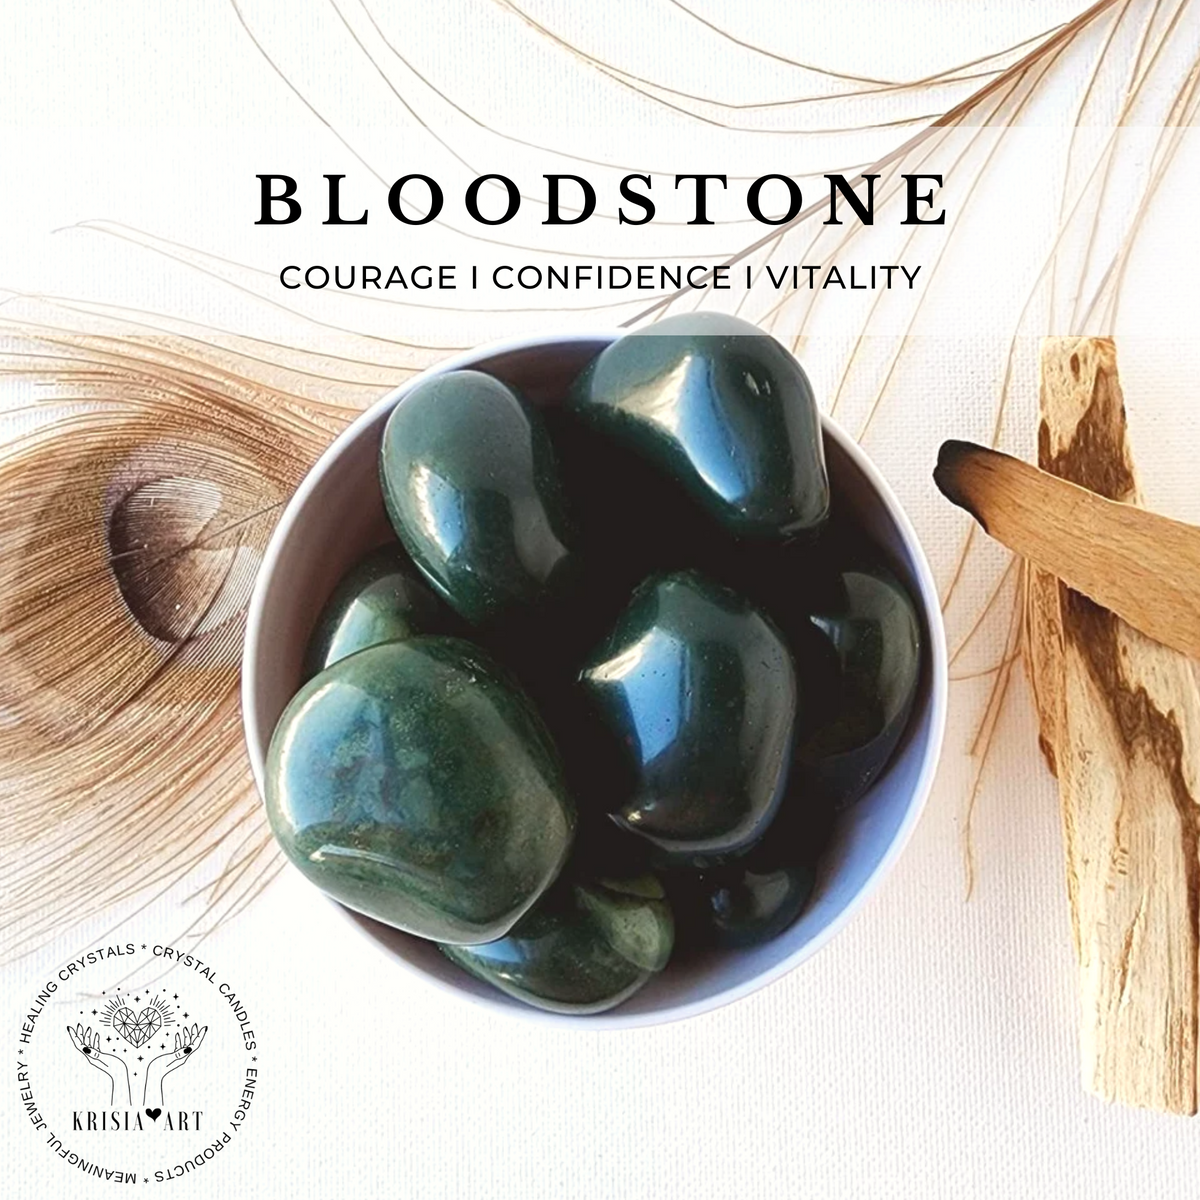 BLOODSTONE tumbled crystal for courage, vitality, confidence reiki healing root chakra meditation